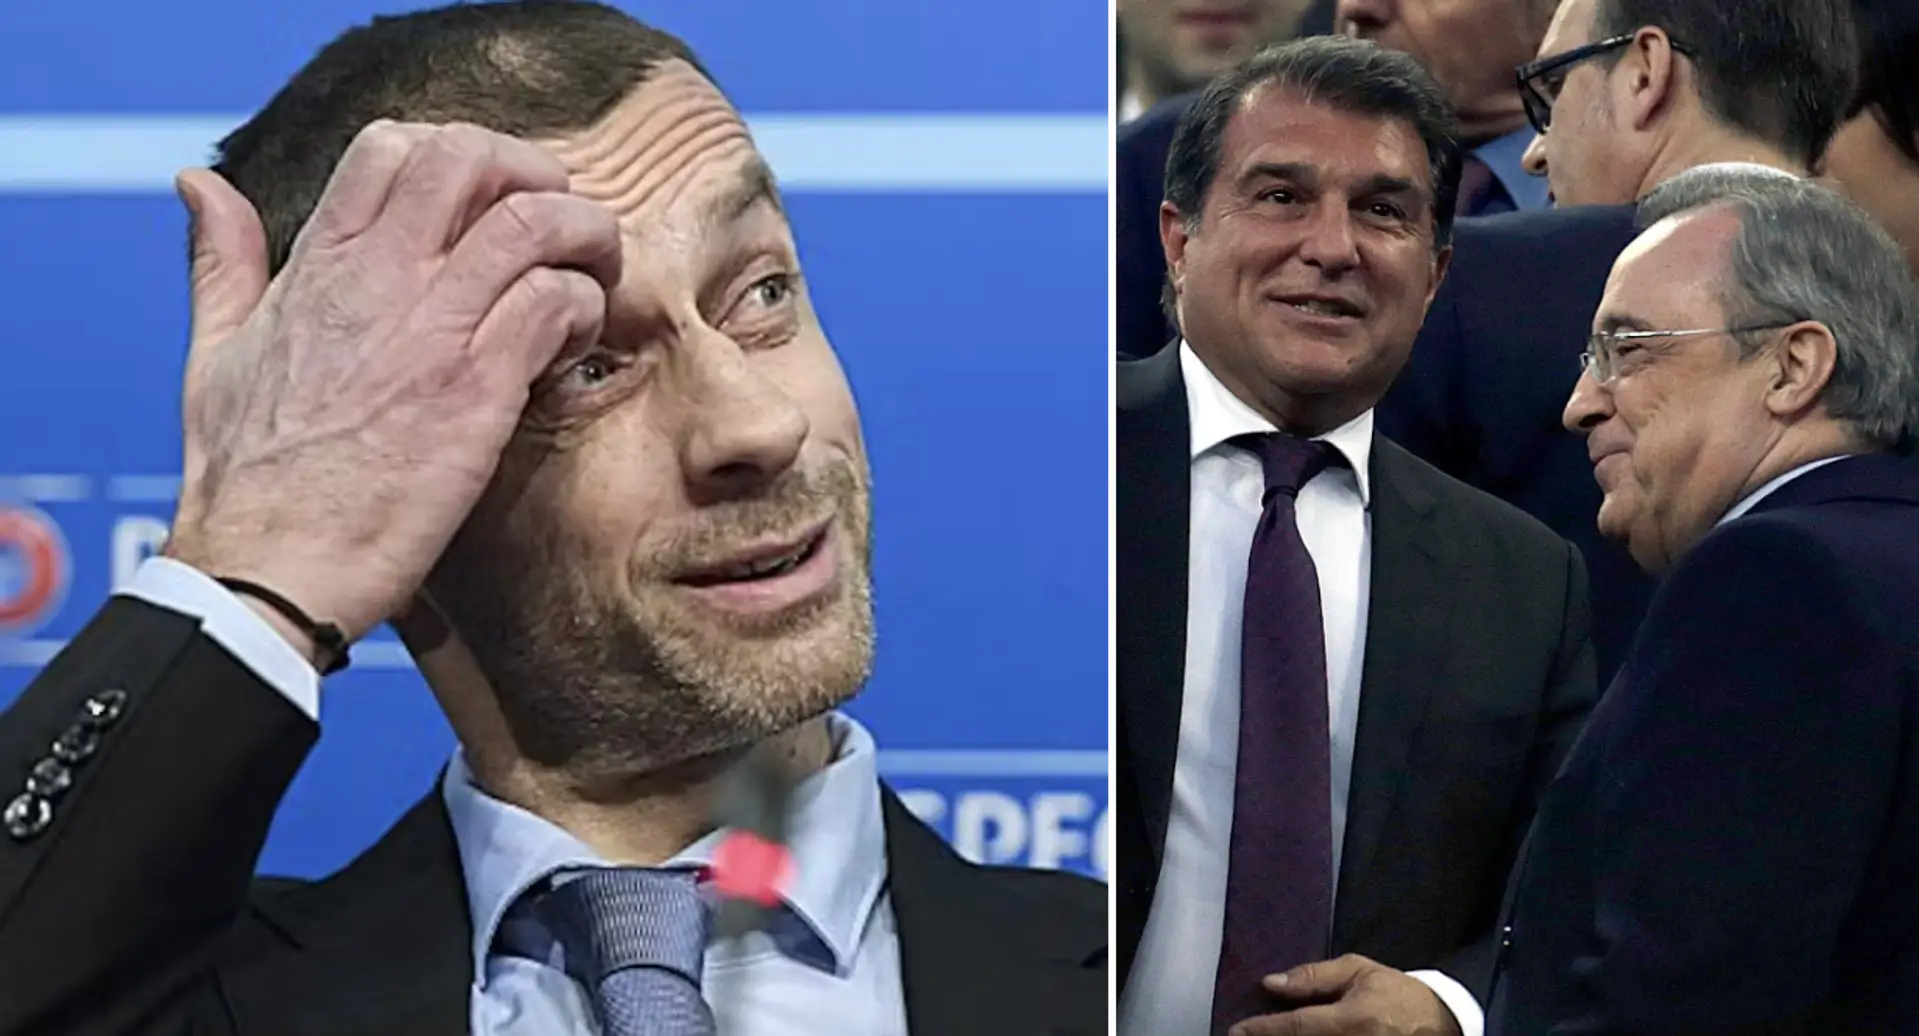 UEFA boss Ceferin reacts to Super League ruling, sends message to Perez and Laporta